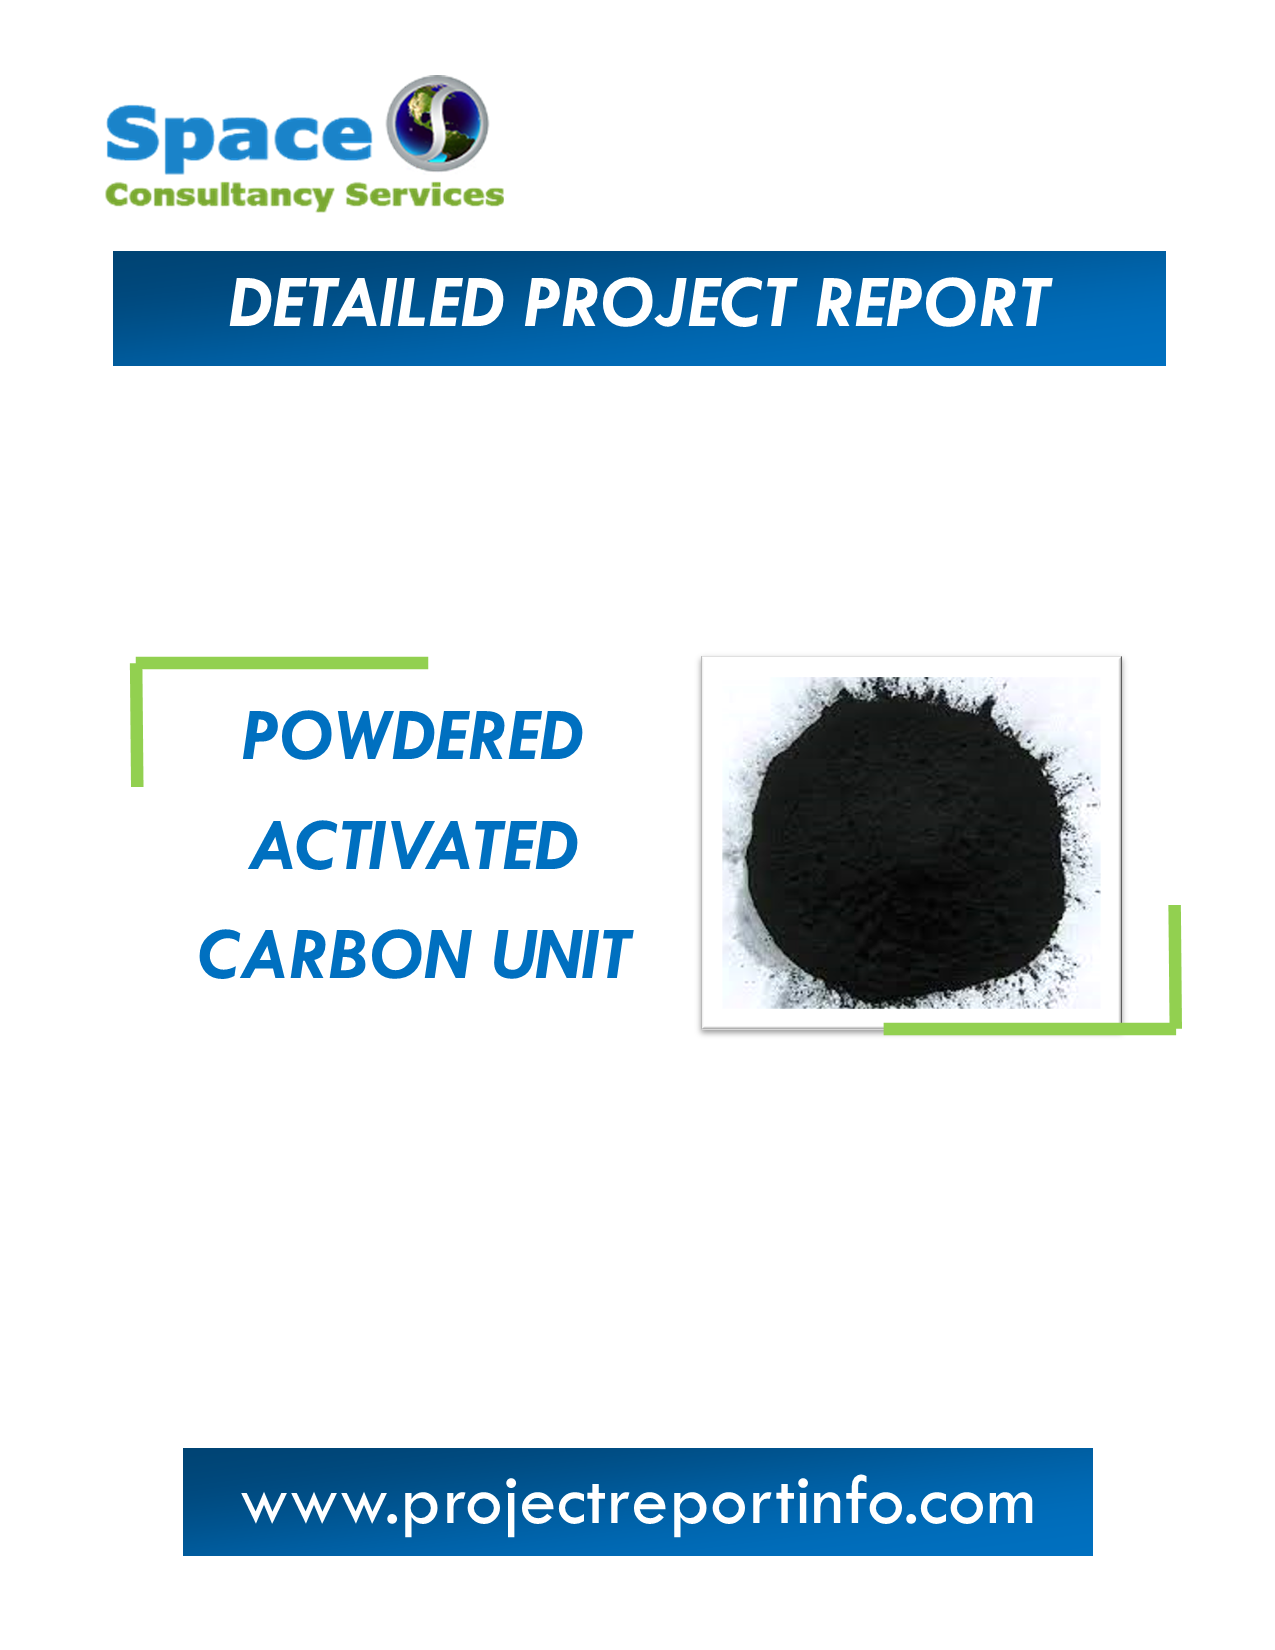 Project Report on Powdered Activated carbon Unit